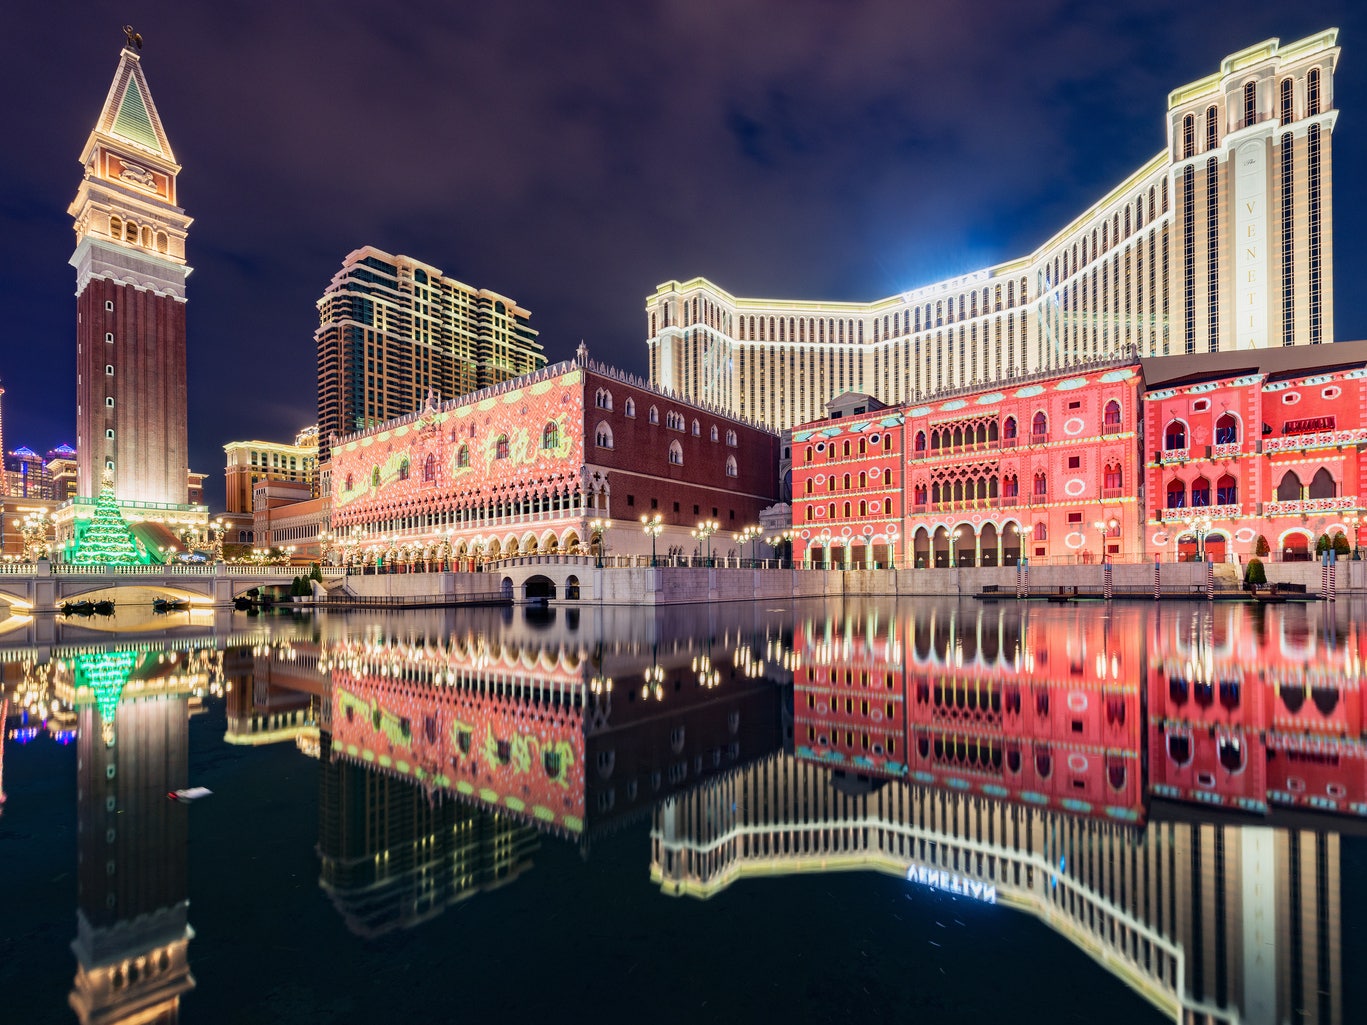 Las Vegas Sands beats Wall Street estimates on ongoing tourism recovery in  Macau